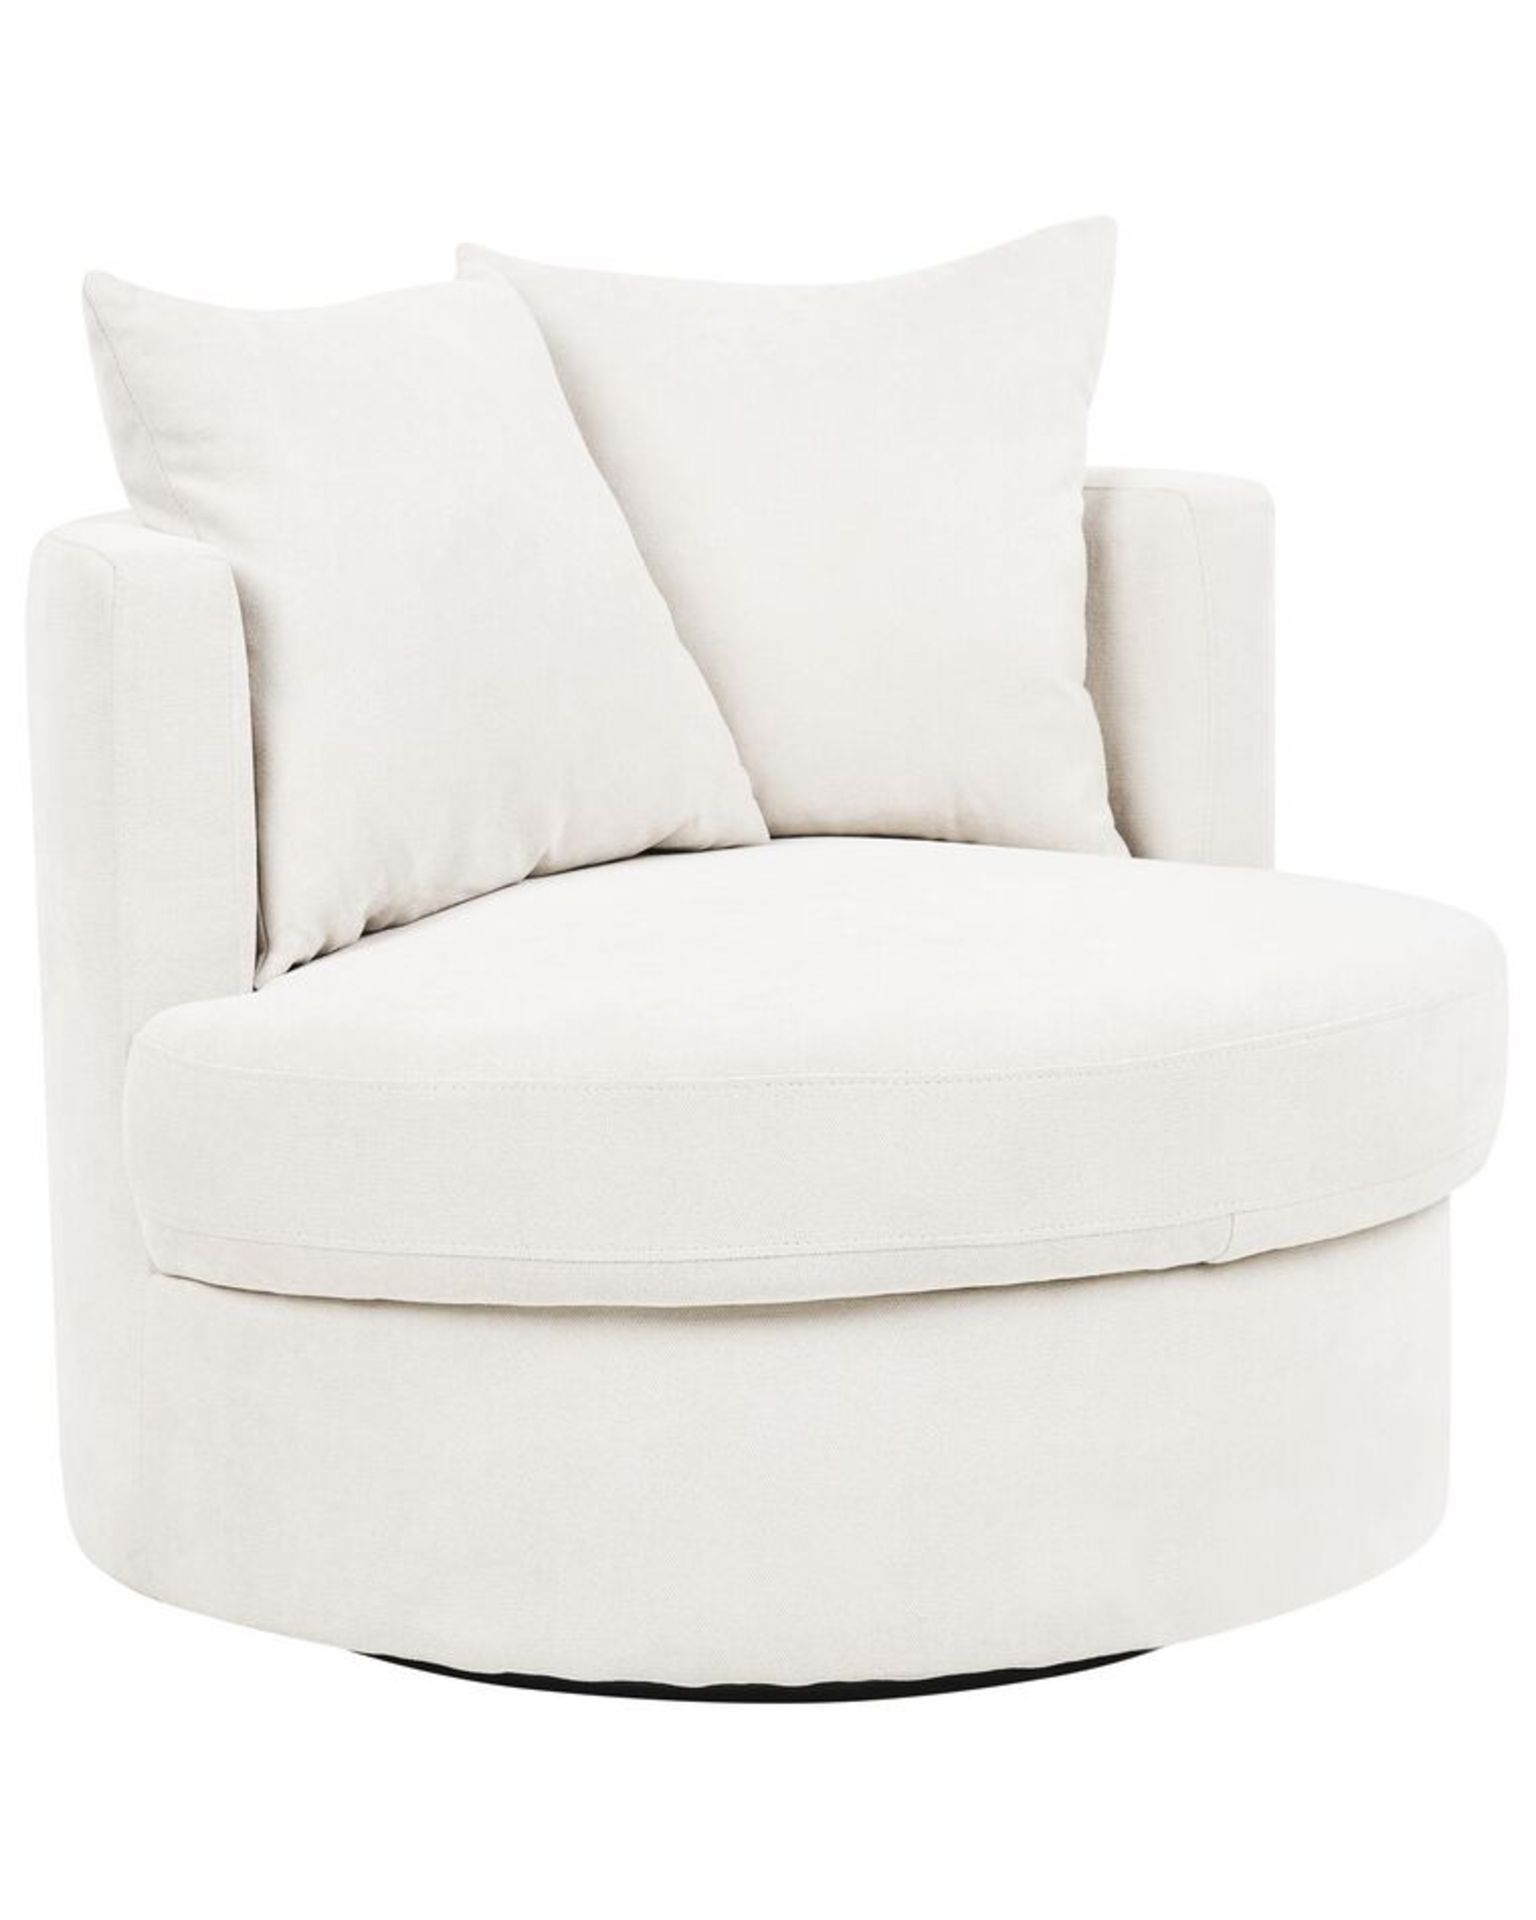 Dalby Swivel Fabric Armchair Light Beige. - R14. RRP £465.99. Elevate your space with this modern - Image 2 of 2